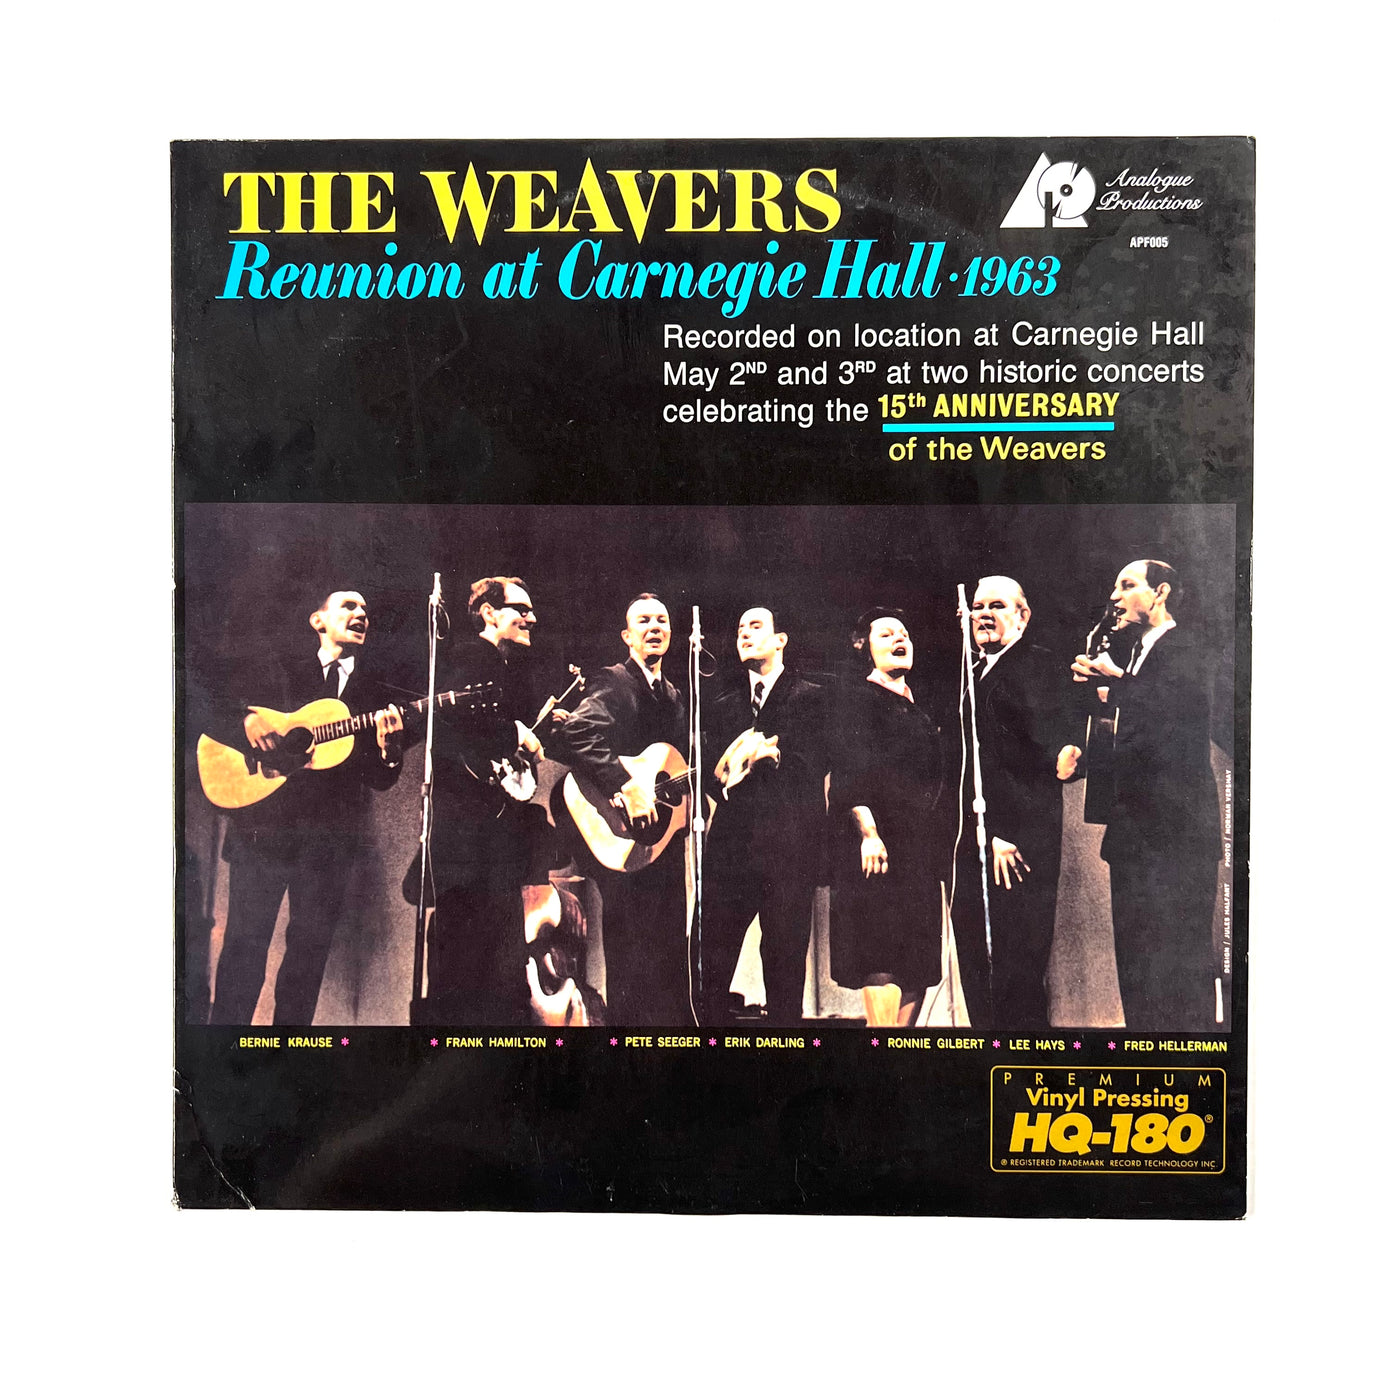 The Weavers - Reunion At Carnegie Hall - 1963 (1994 Reissue)